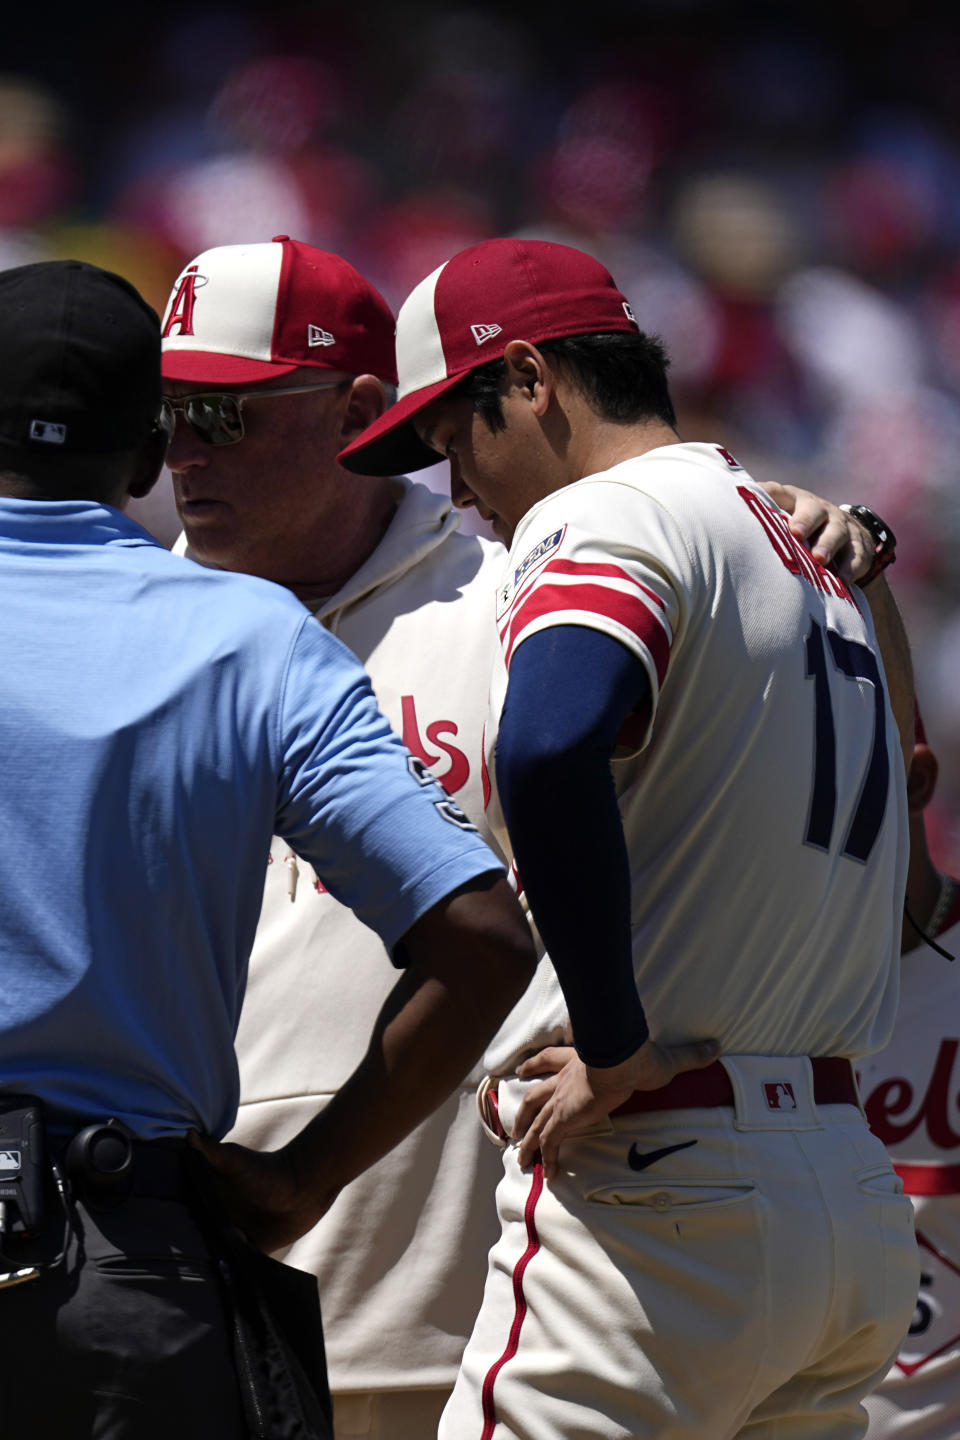 Los Angeles Angels manager Phil Nevin, center, talks with starting pitcher Shohei Ohtani before taking him out of the game due to arm fatigue during the second inning in the first baseball game of a doubleheader Wednesday, Aug. 23, 2023, in Anaheim, Calif. (AP Photo/Mark J. Terrill)